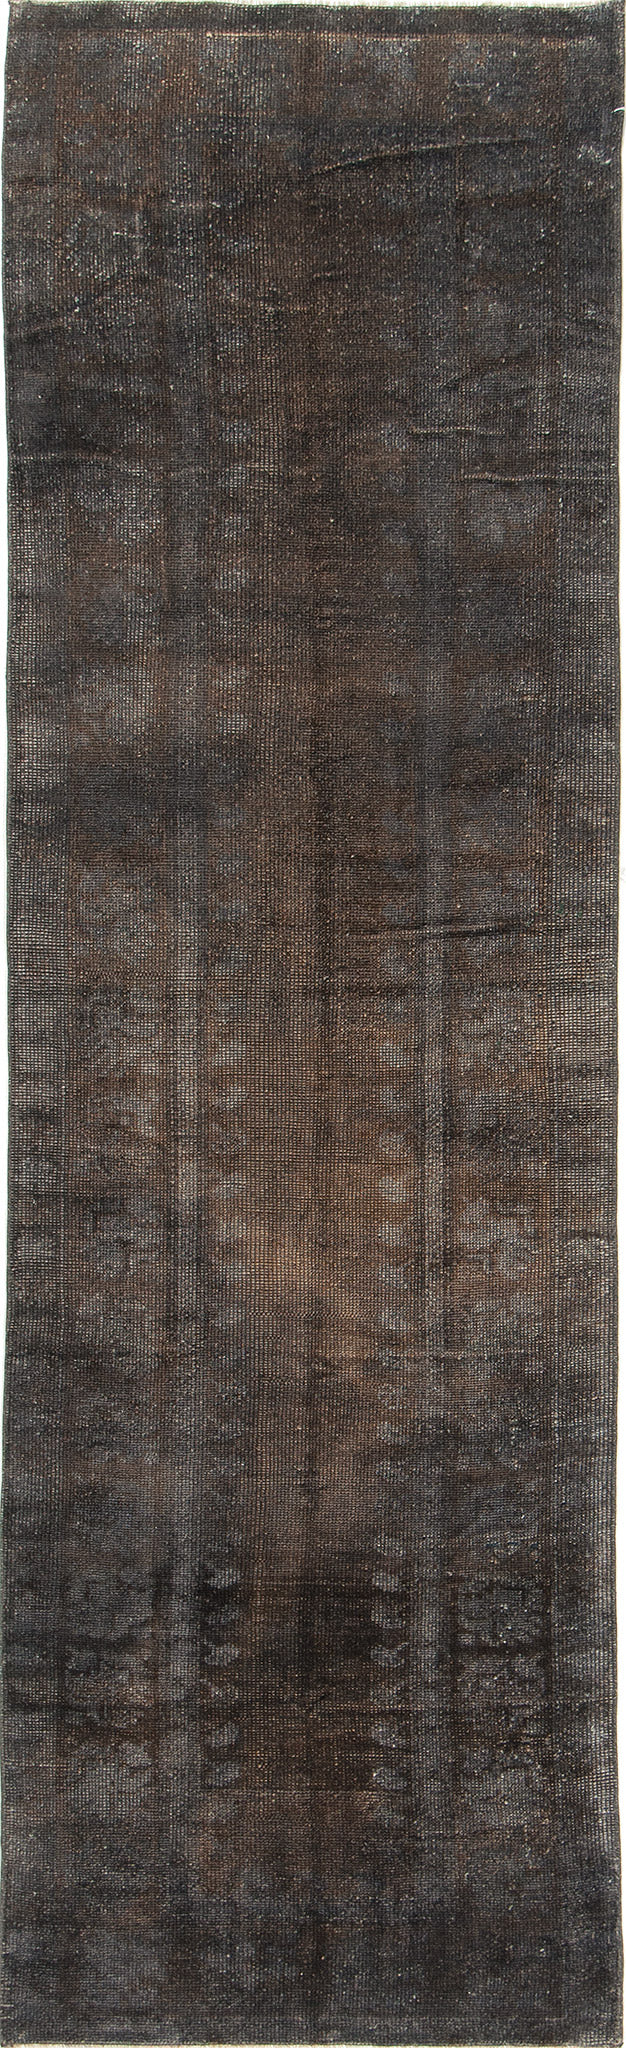 Overdye and Distressed Rugs